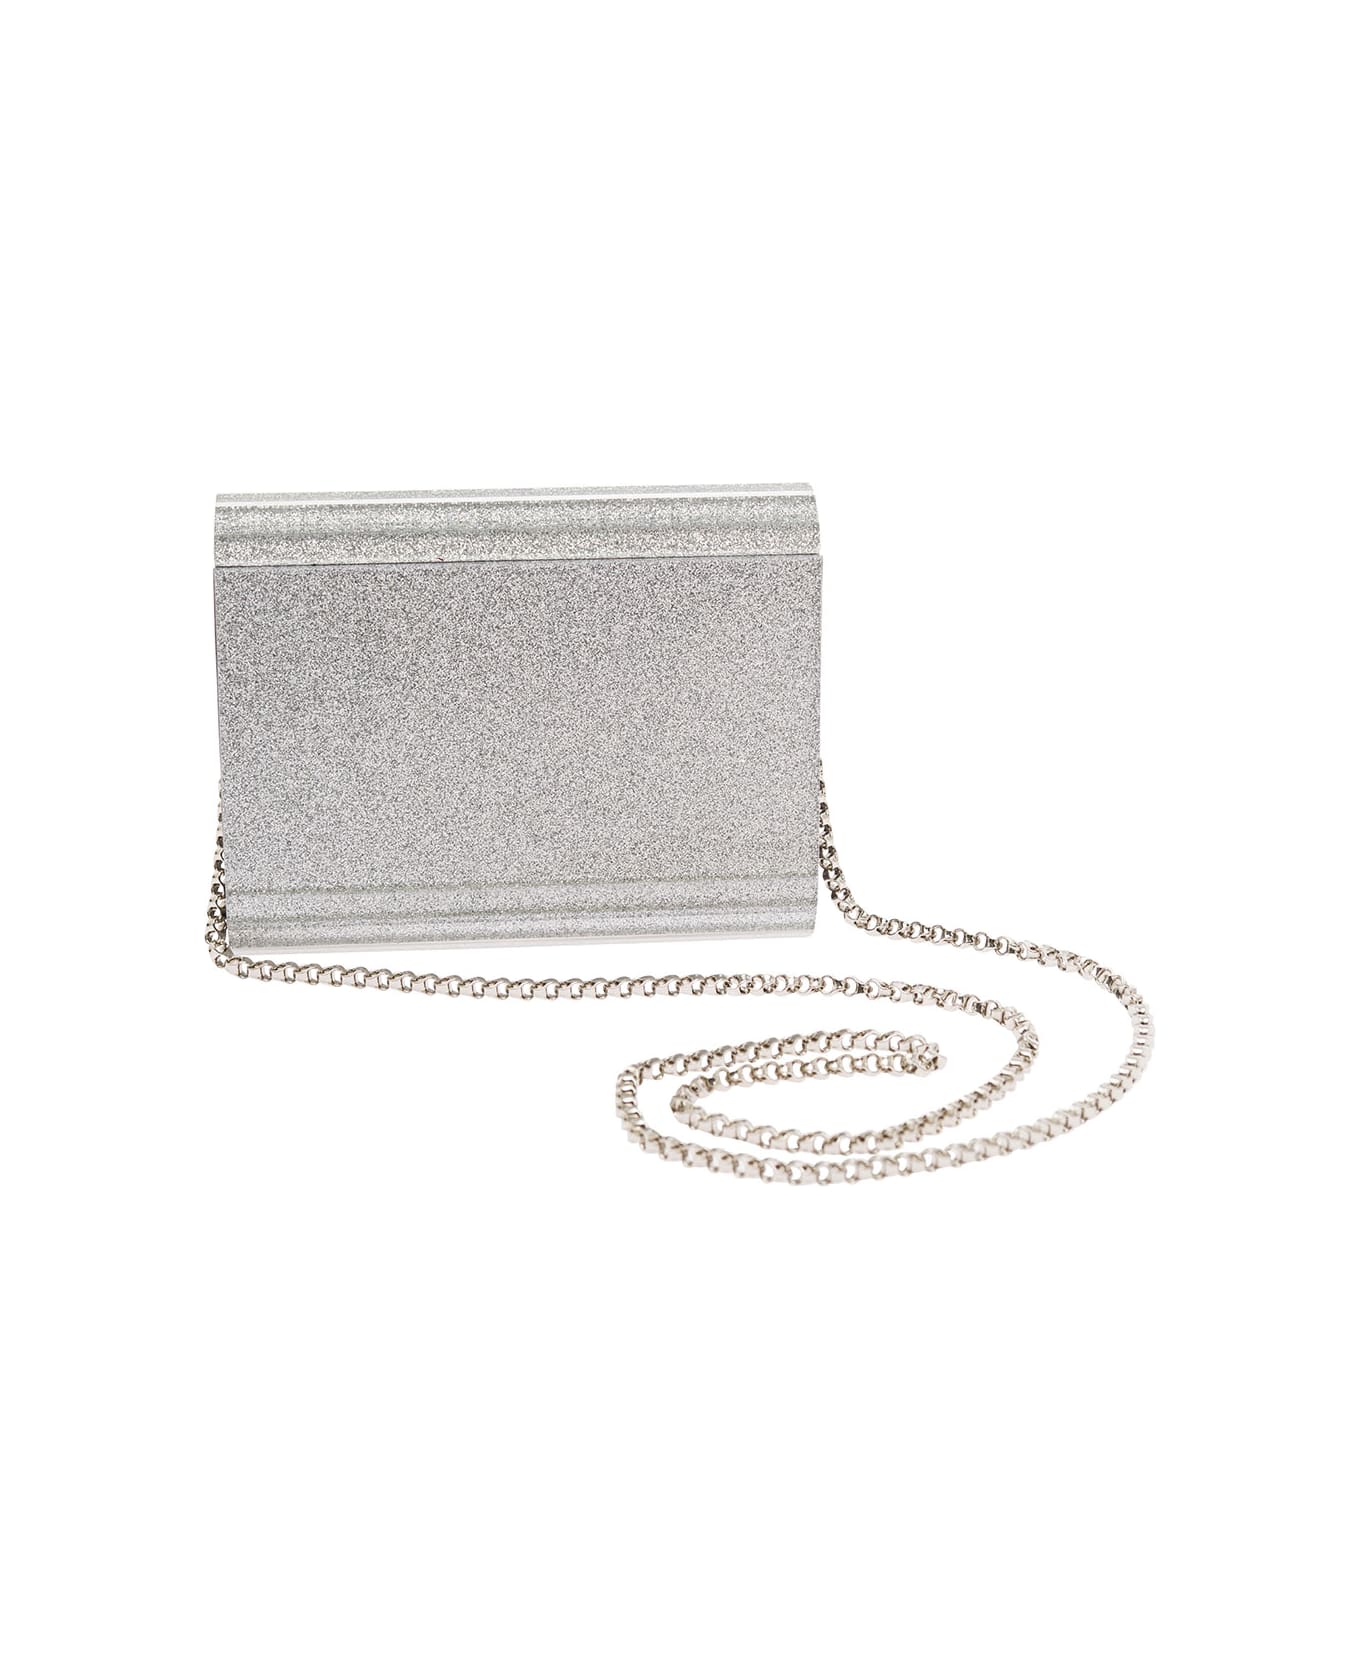 Jimmy Choo Silver Compact Clutch Bag With Chain And Logo Detail In Glitter Acrylic Woman - Metallic